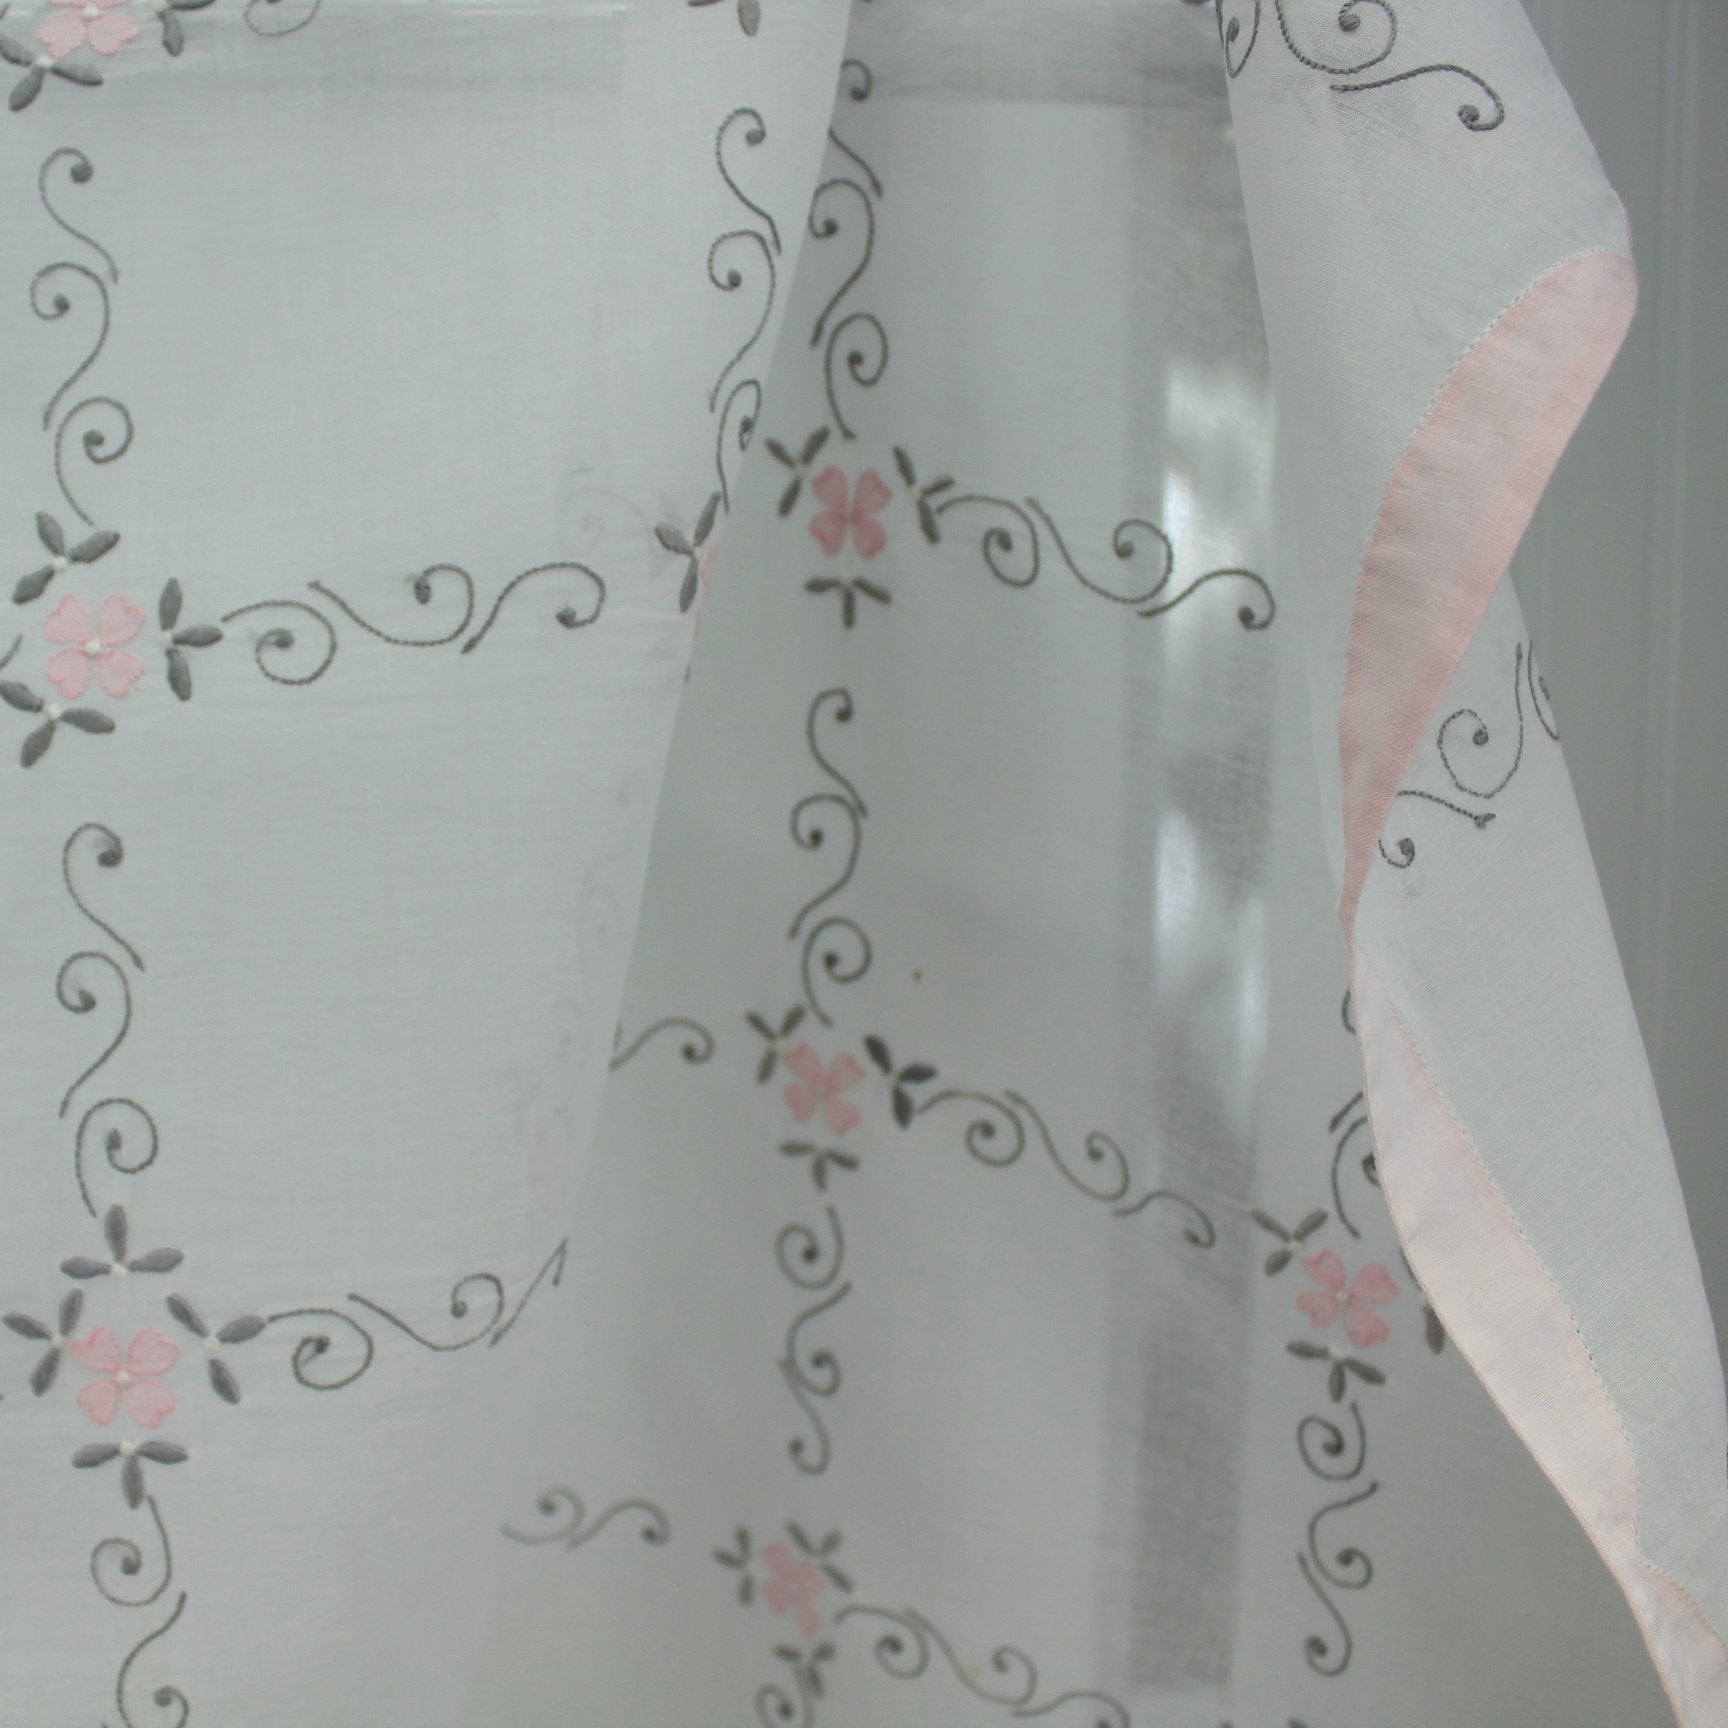 Elegant Small White Organdy Table Cloth Embroidery Pink Flower Applique Metal Label "I" closeup design